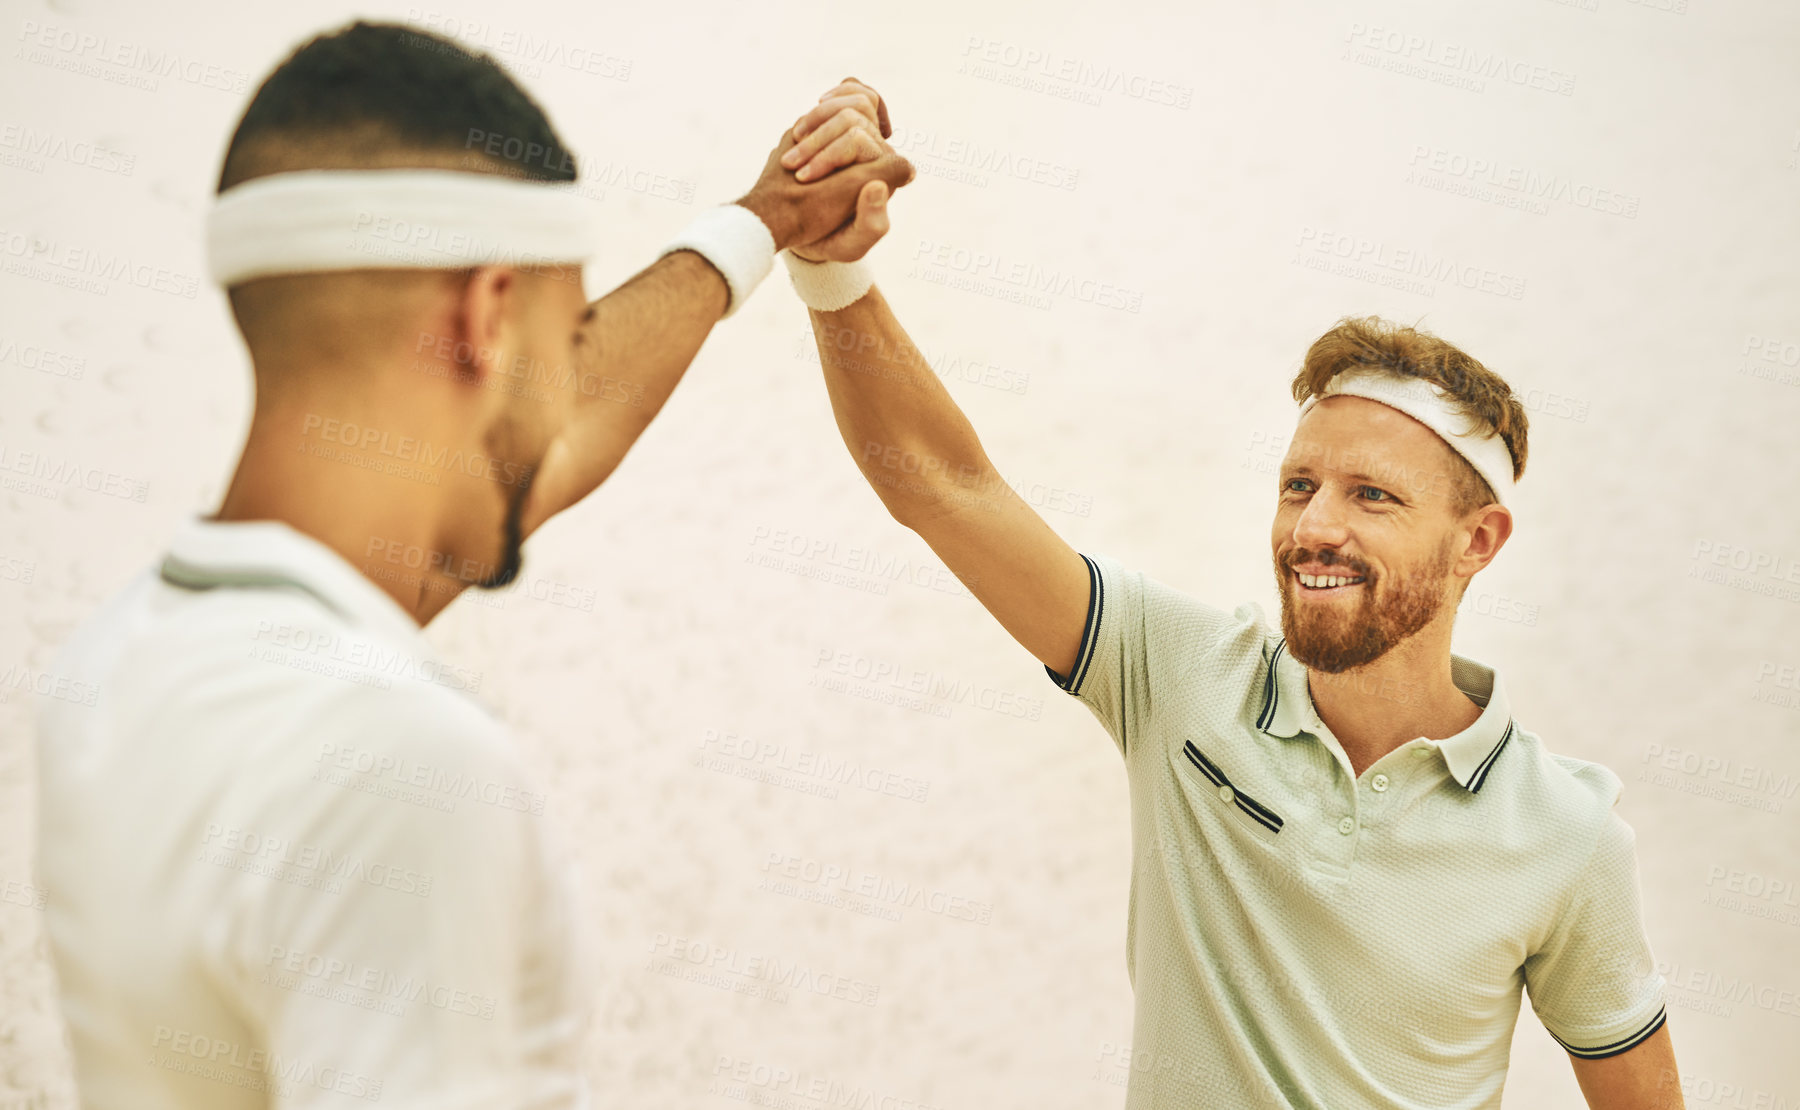 Buy stock photo Shot of two young men giving each other a high five before playing a game of squash